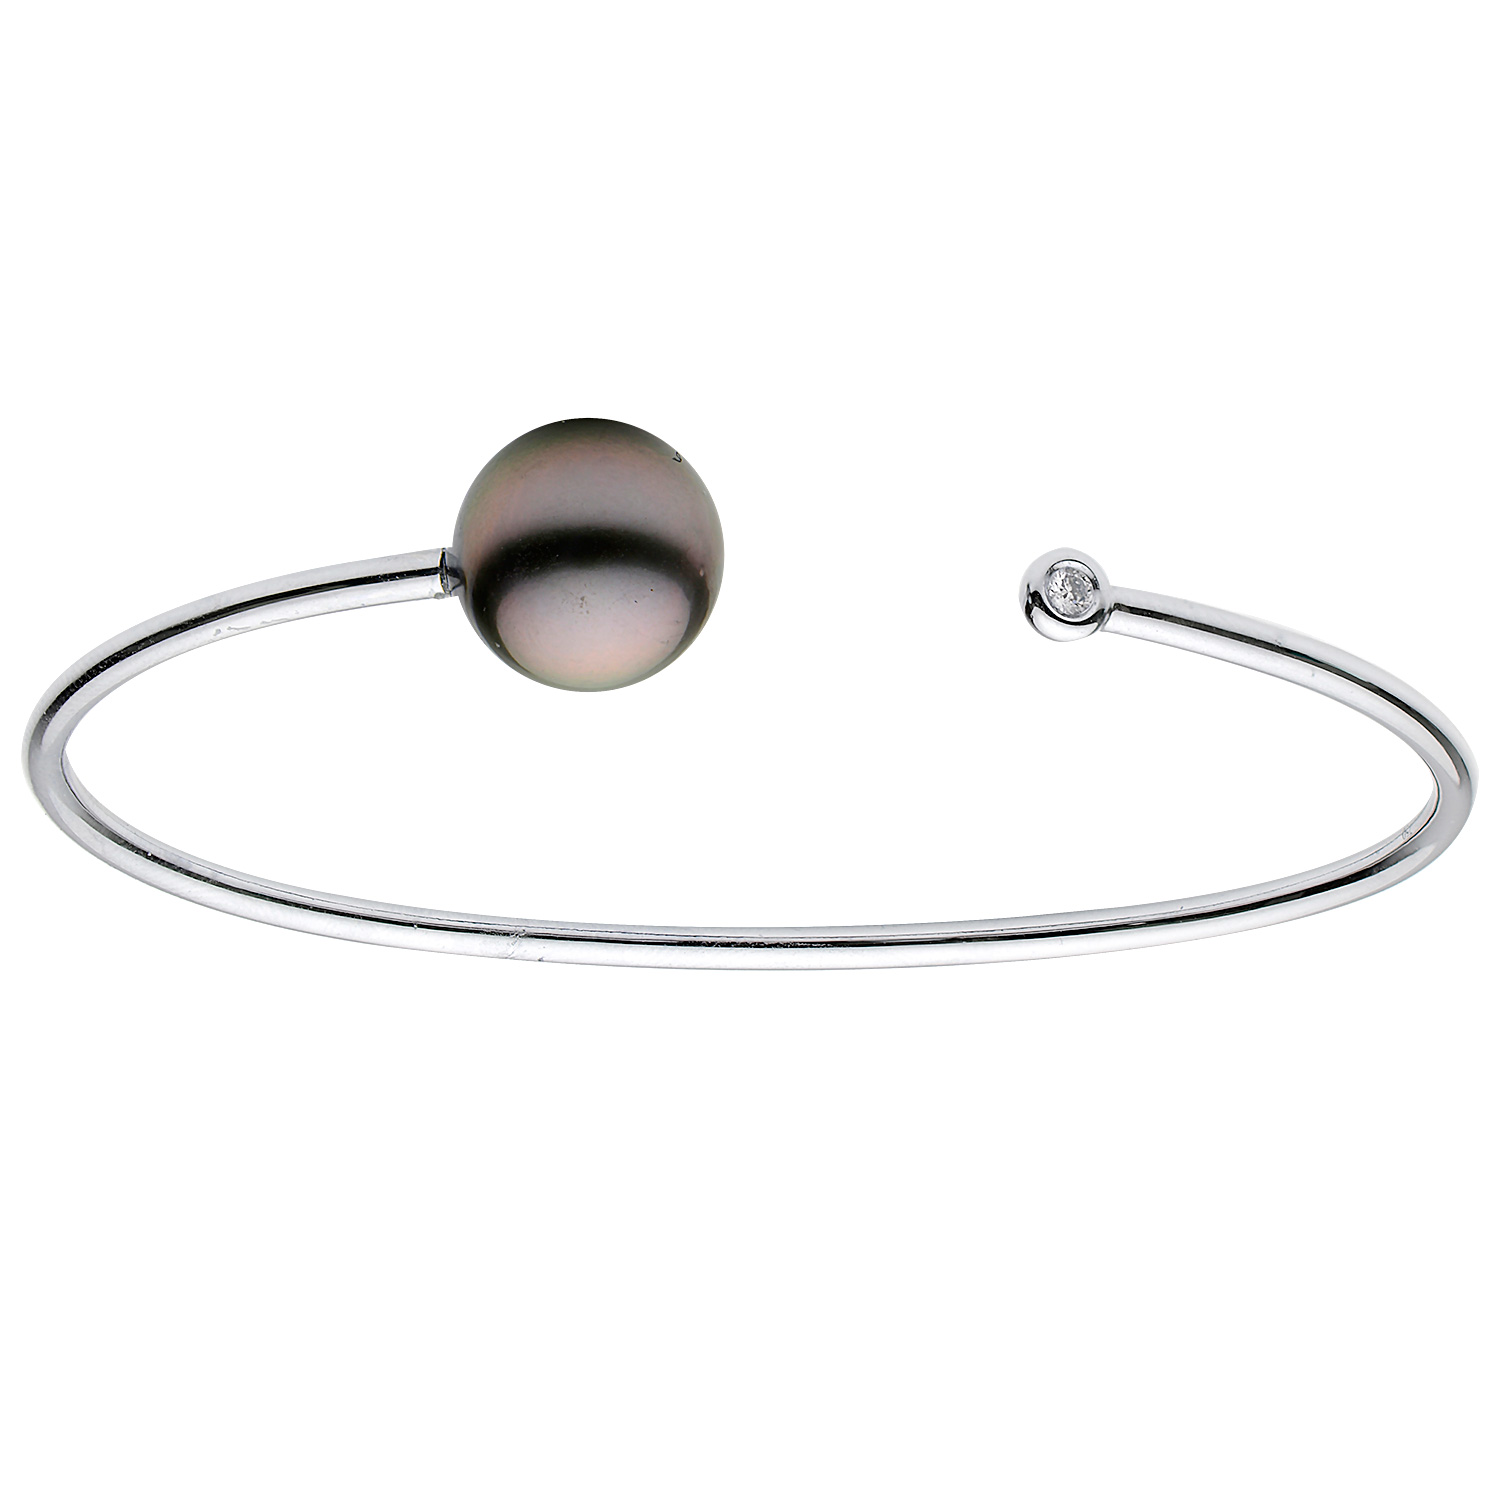 18 Karat white gold bangle with One 11.00mm Tahitian Pearl and One 0.03Ct Round Brilliant G Vs Diamond